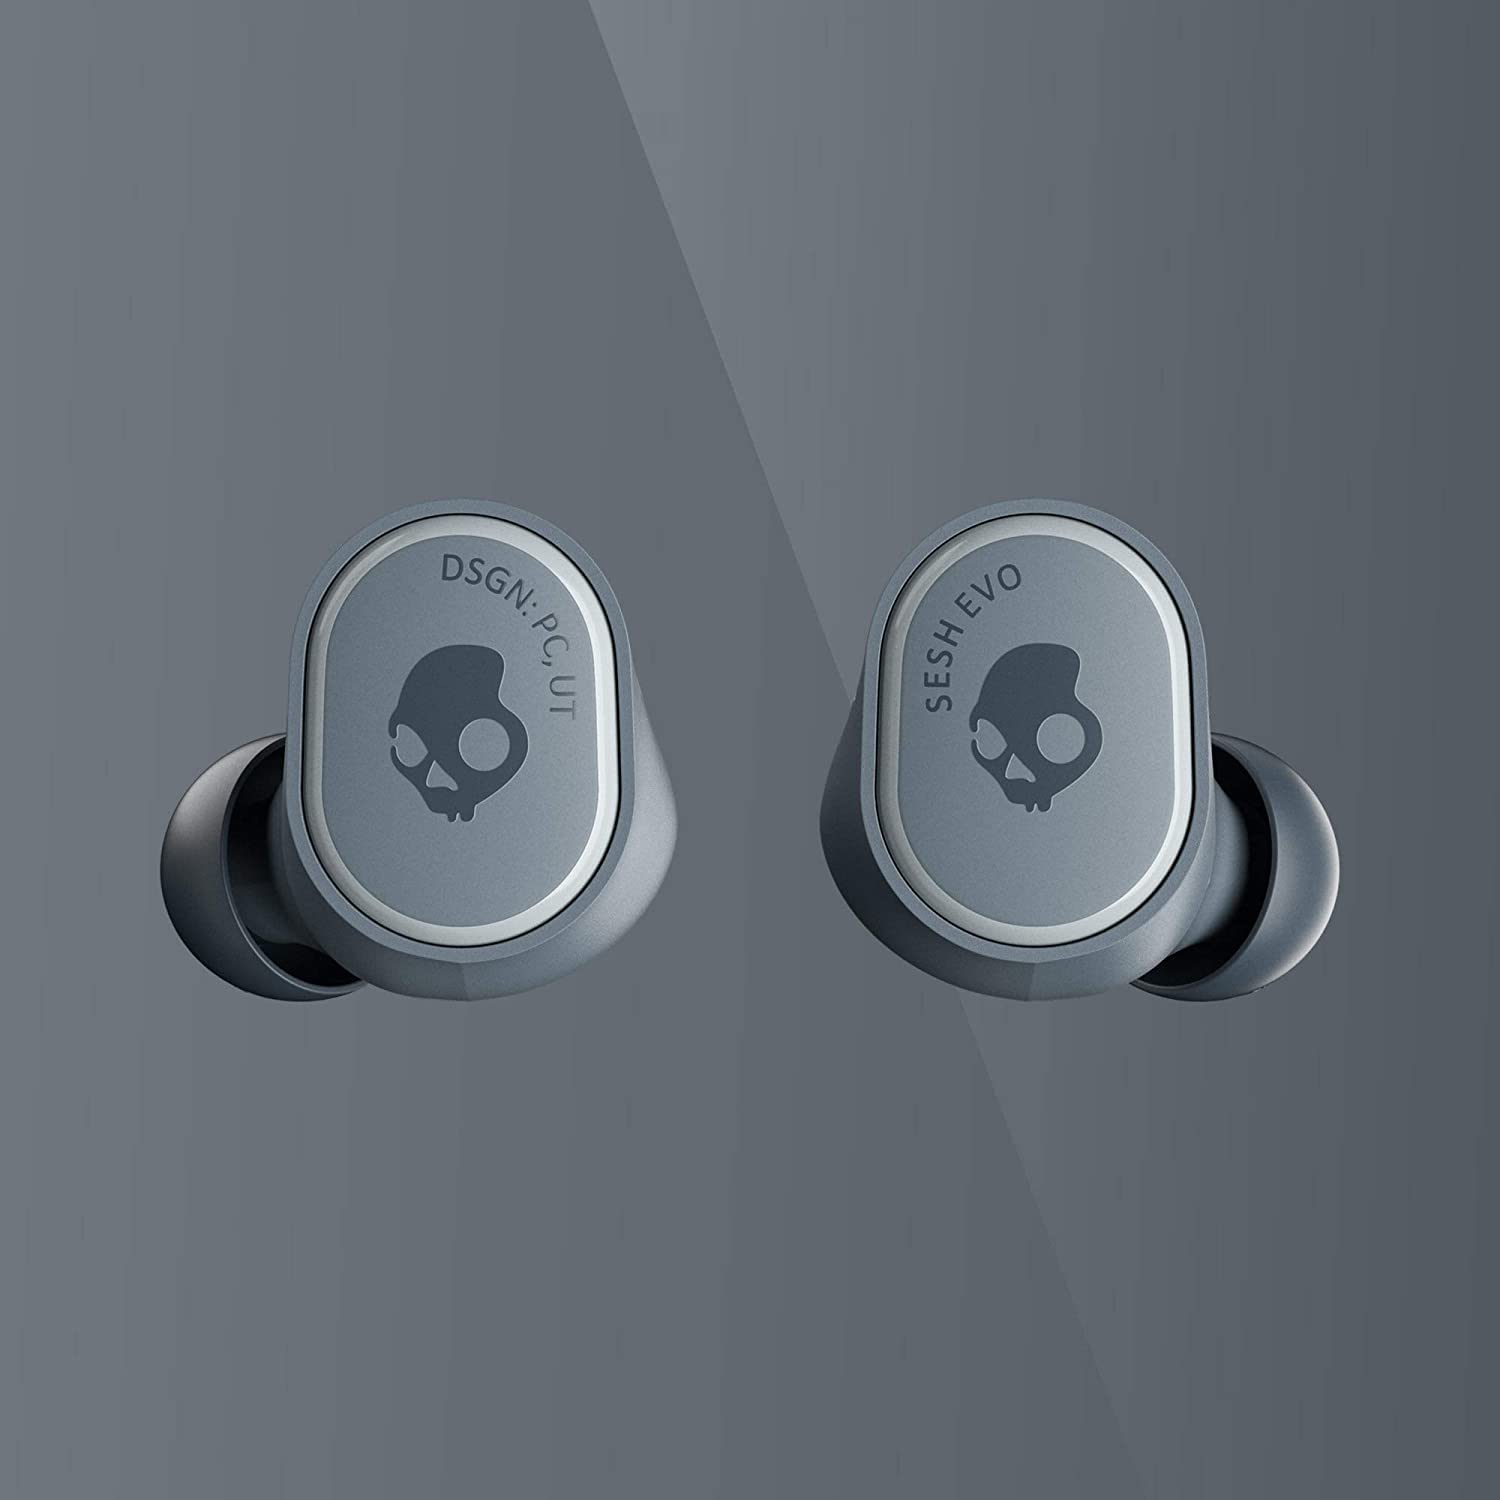 Skullcandy Sesh Evo In-Ear Wireless Earbuds, 24 Hr Battery, Microphone, Works with iPhone Android and Bluetooth Devices - Chill Grey